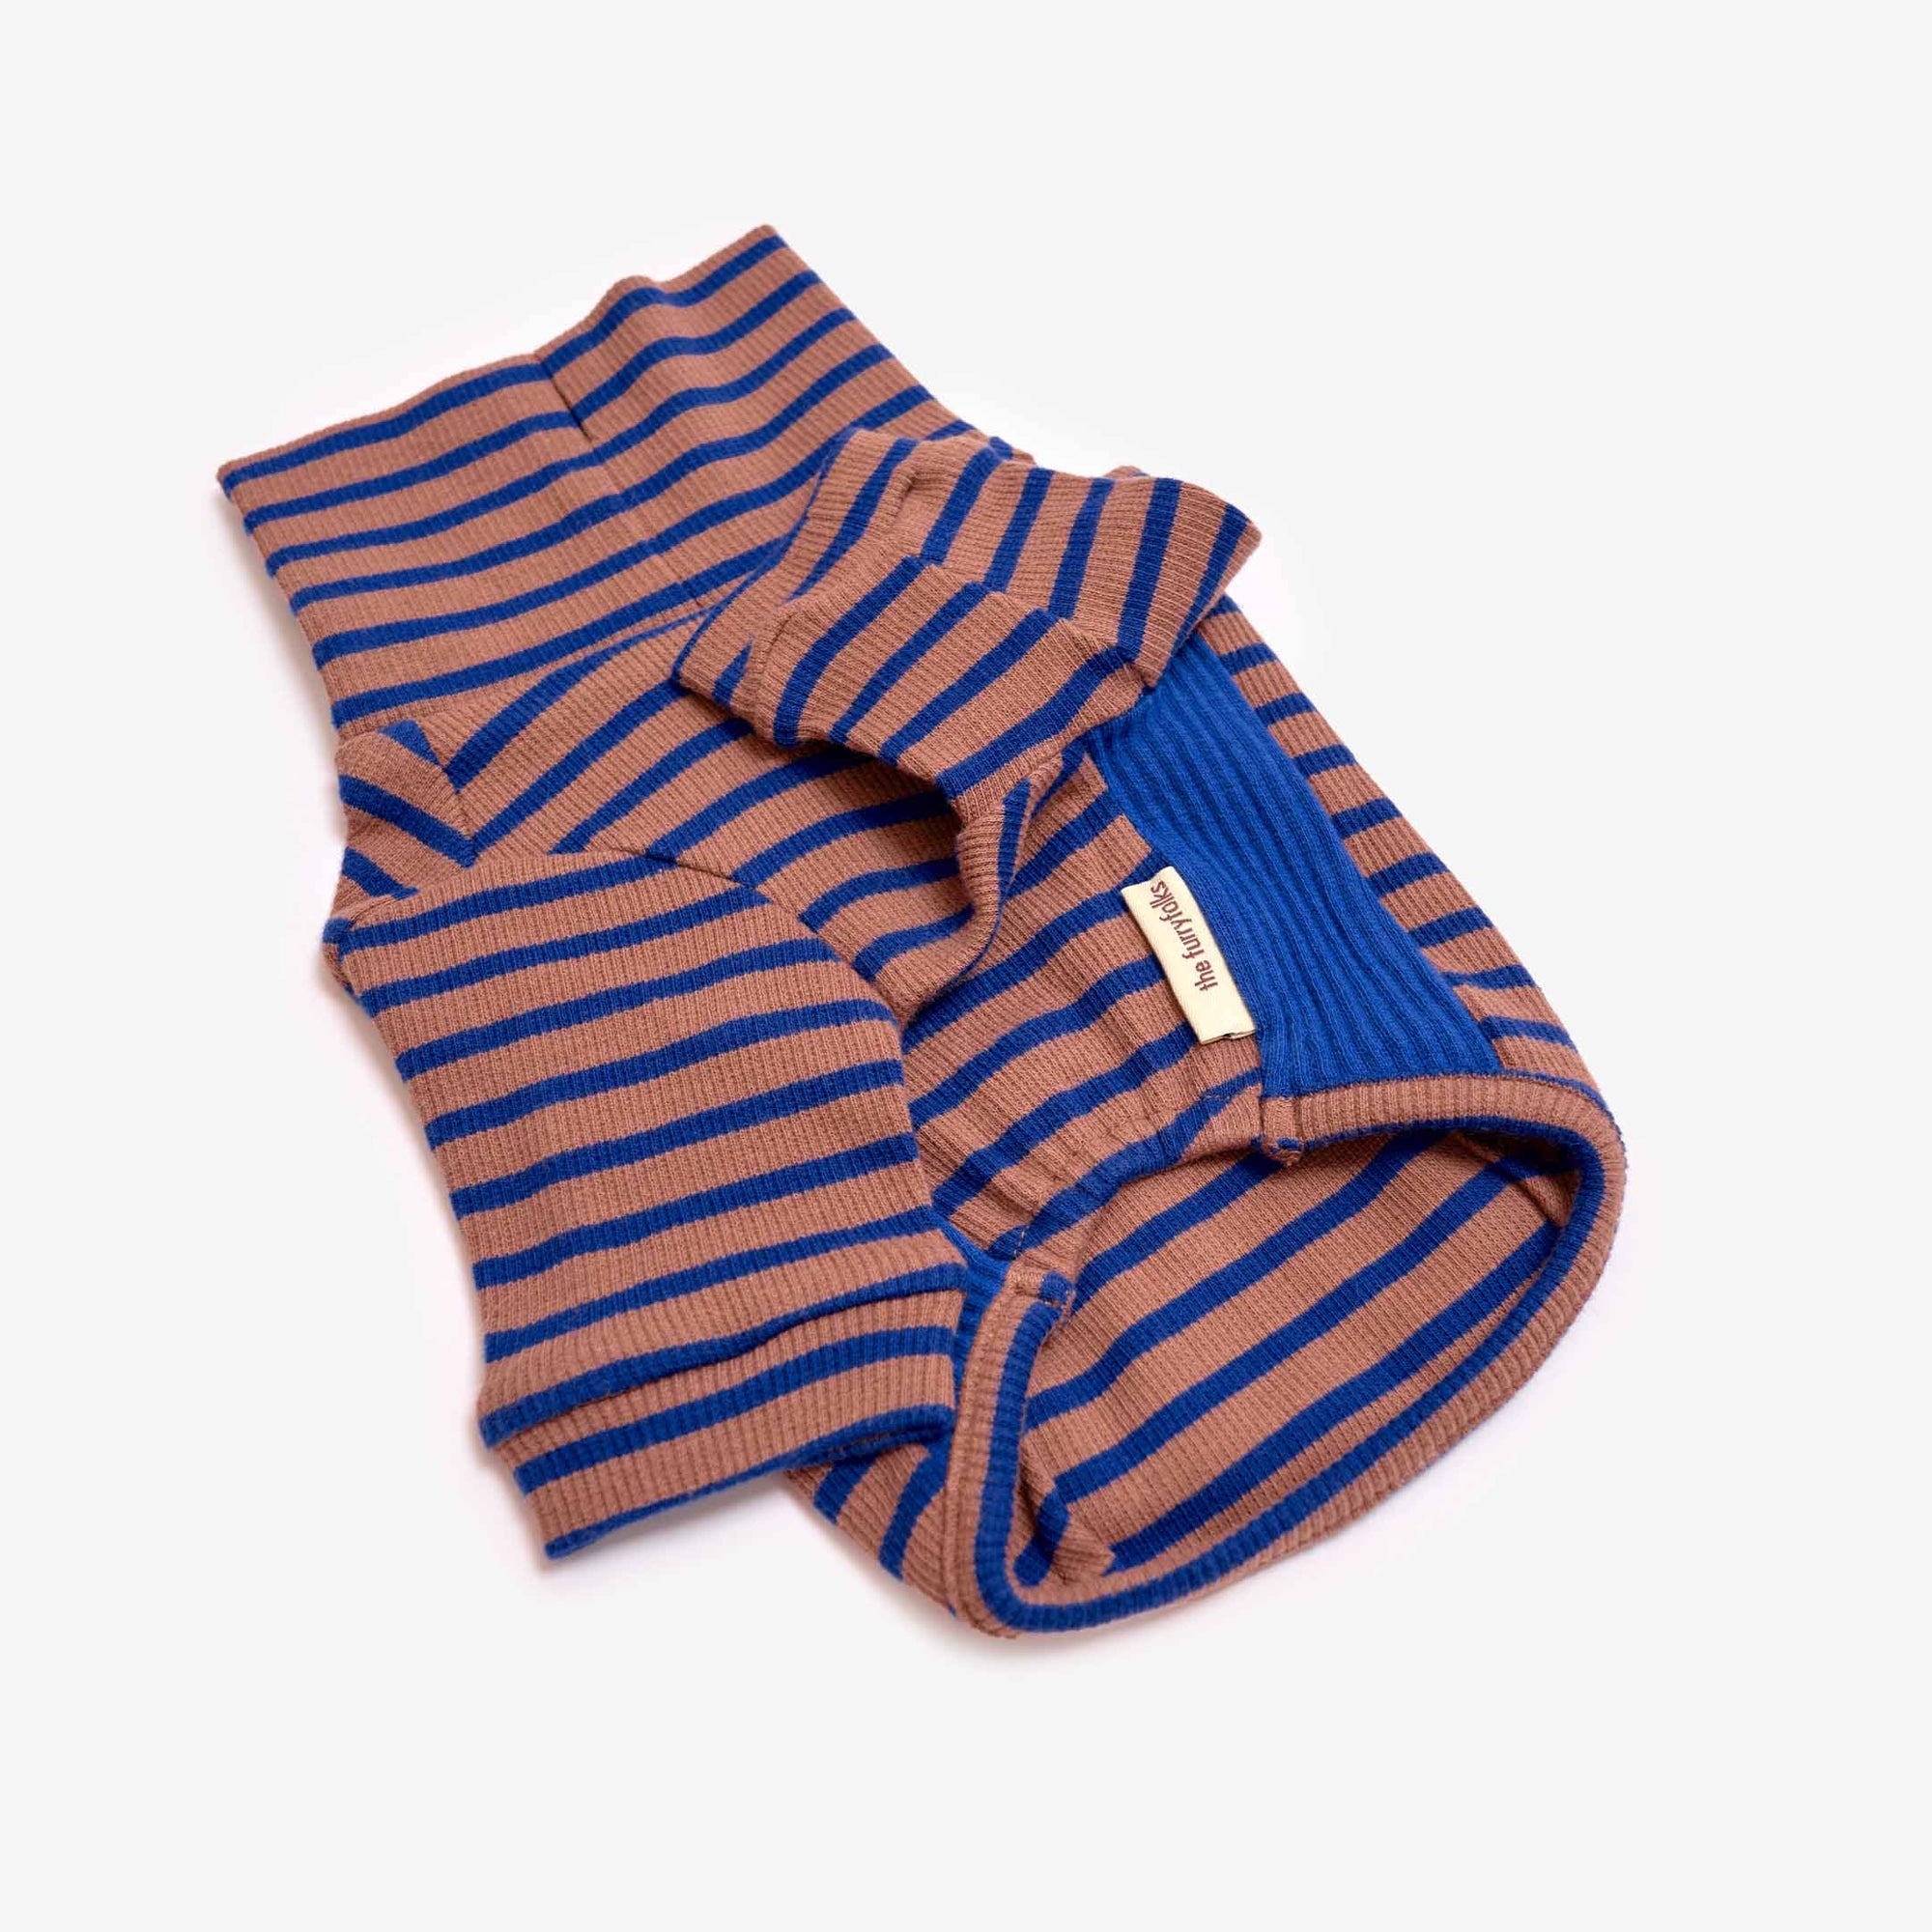 Stylish Cobalt & Brown striped turtleneck dog shirt, complete with ribbed details and a cozy fit for your pet.